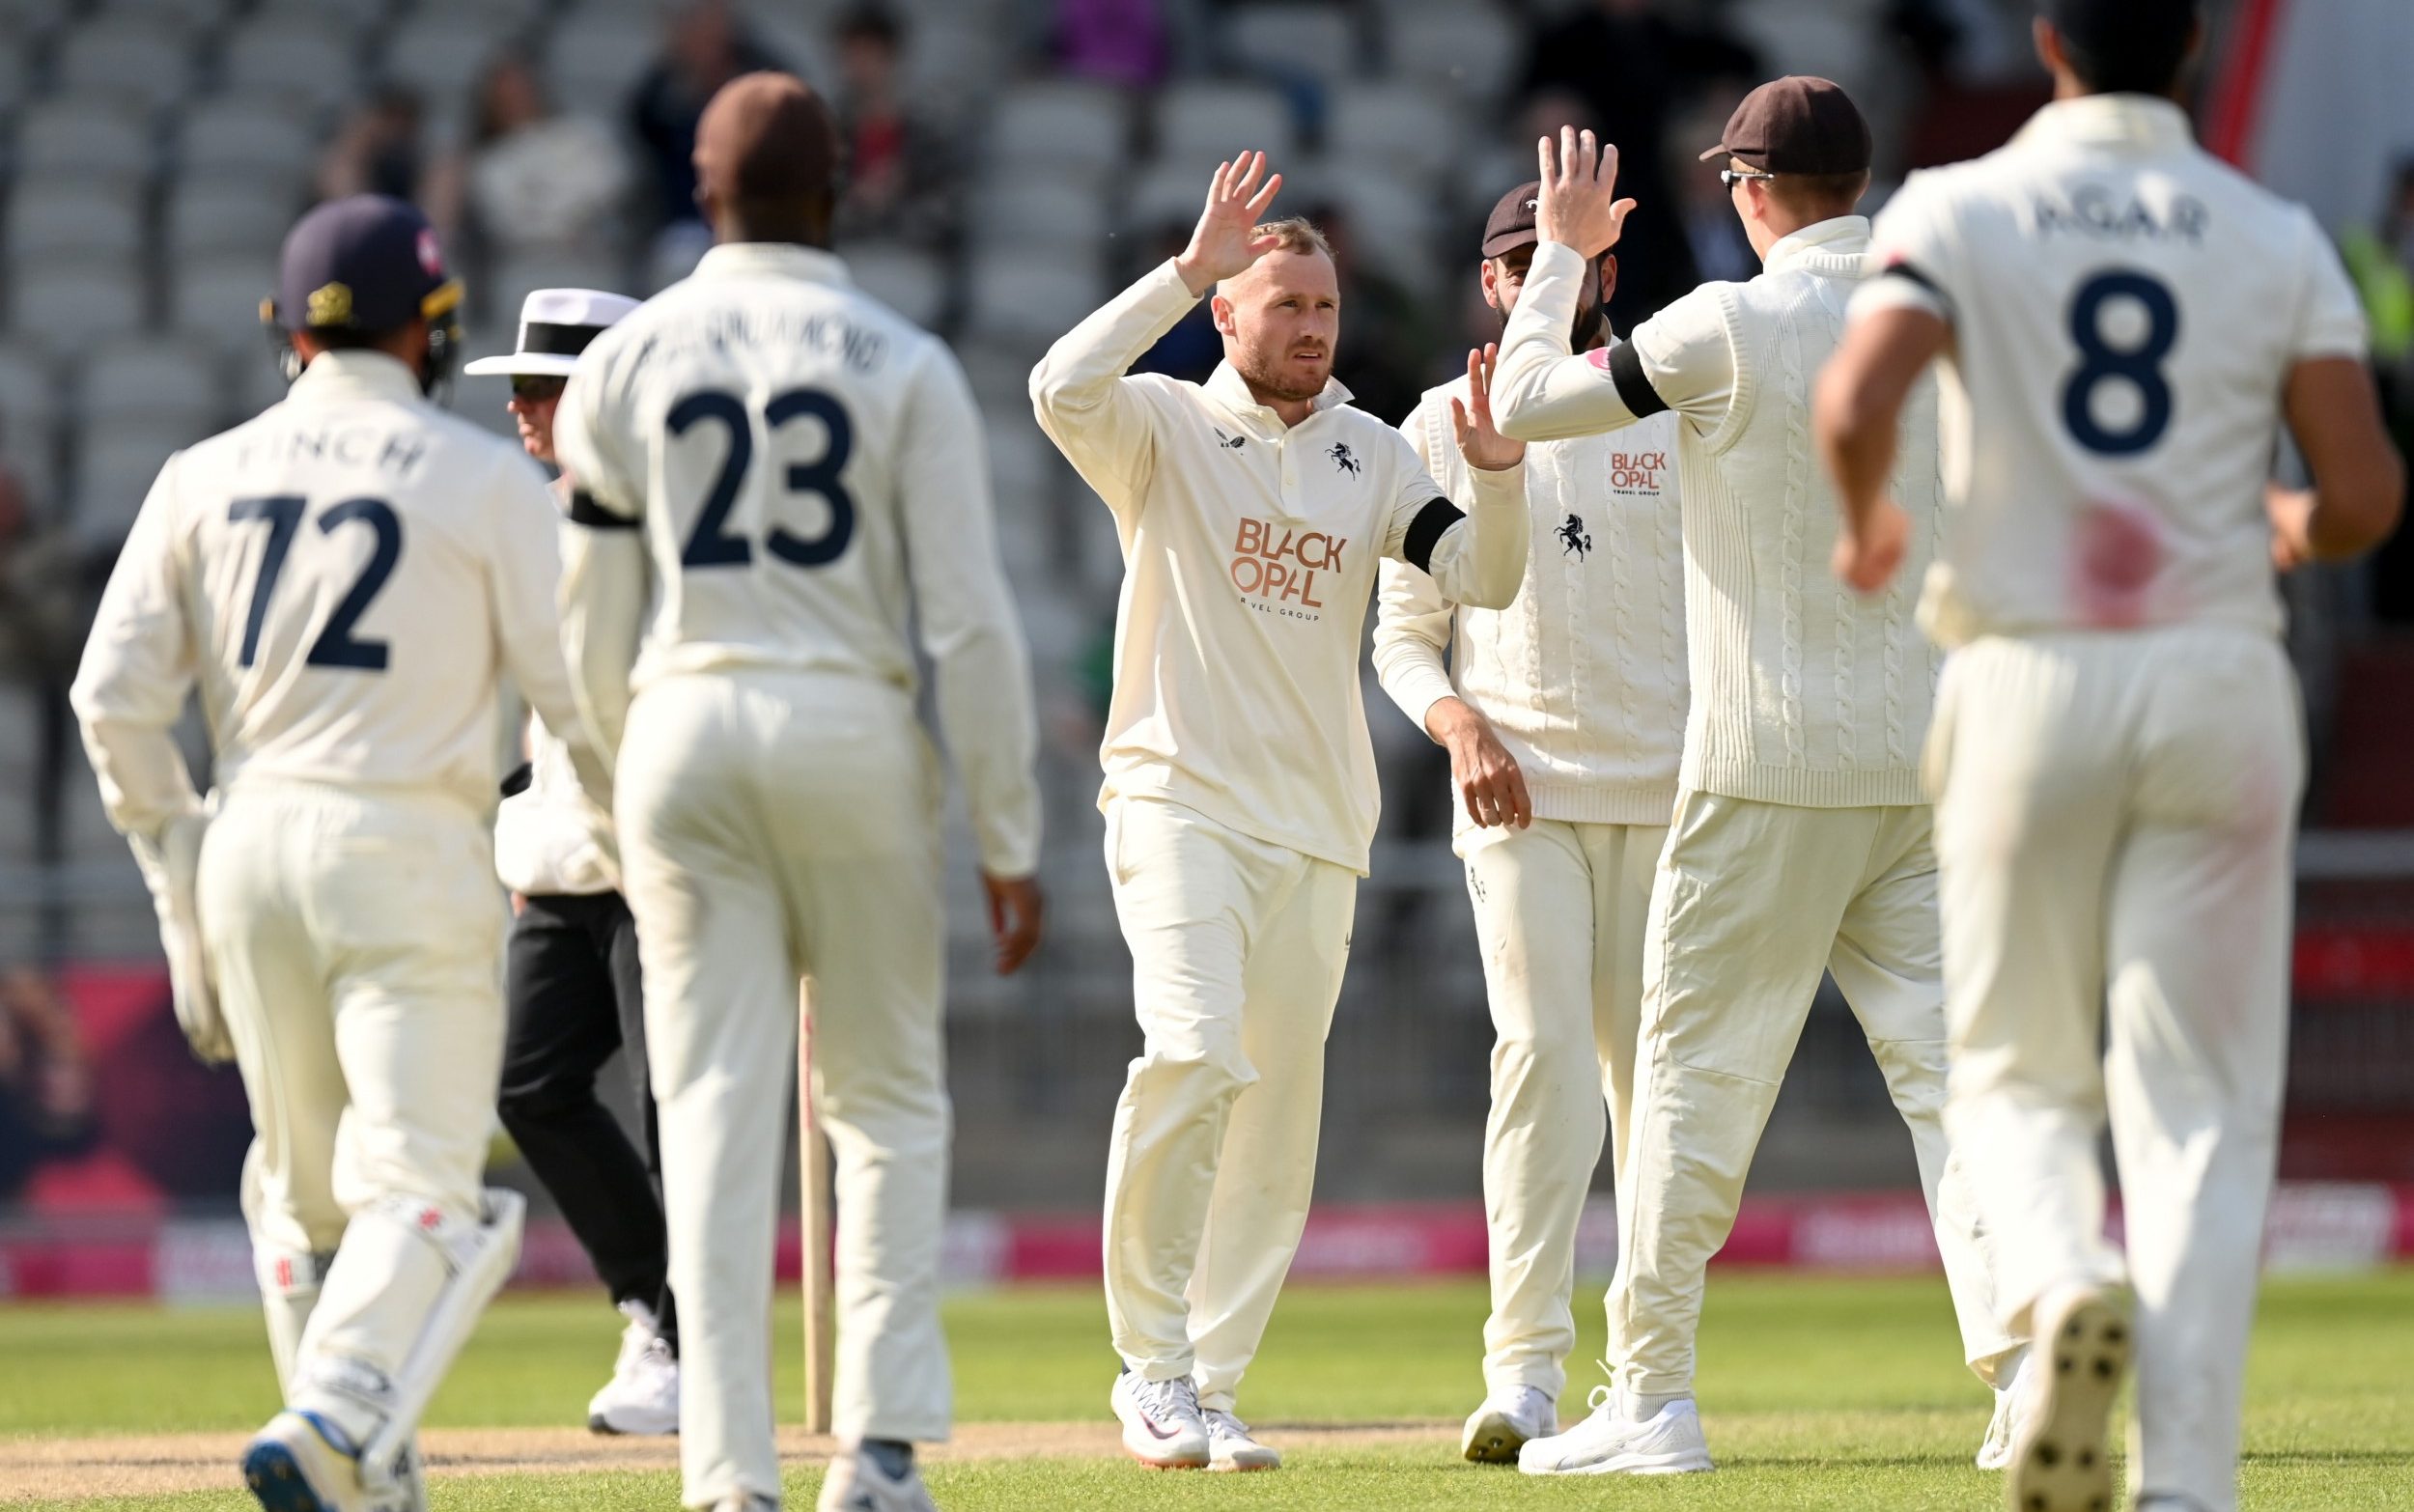 lancashire bottom of division one after chastening defeat at hands of kent